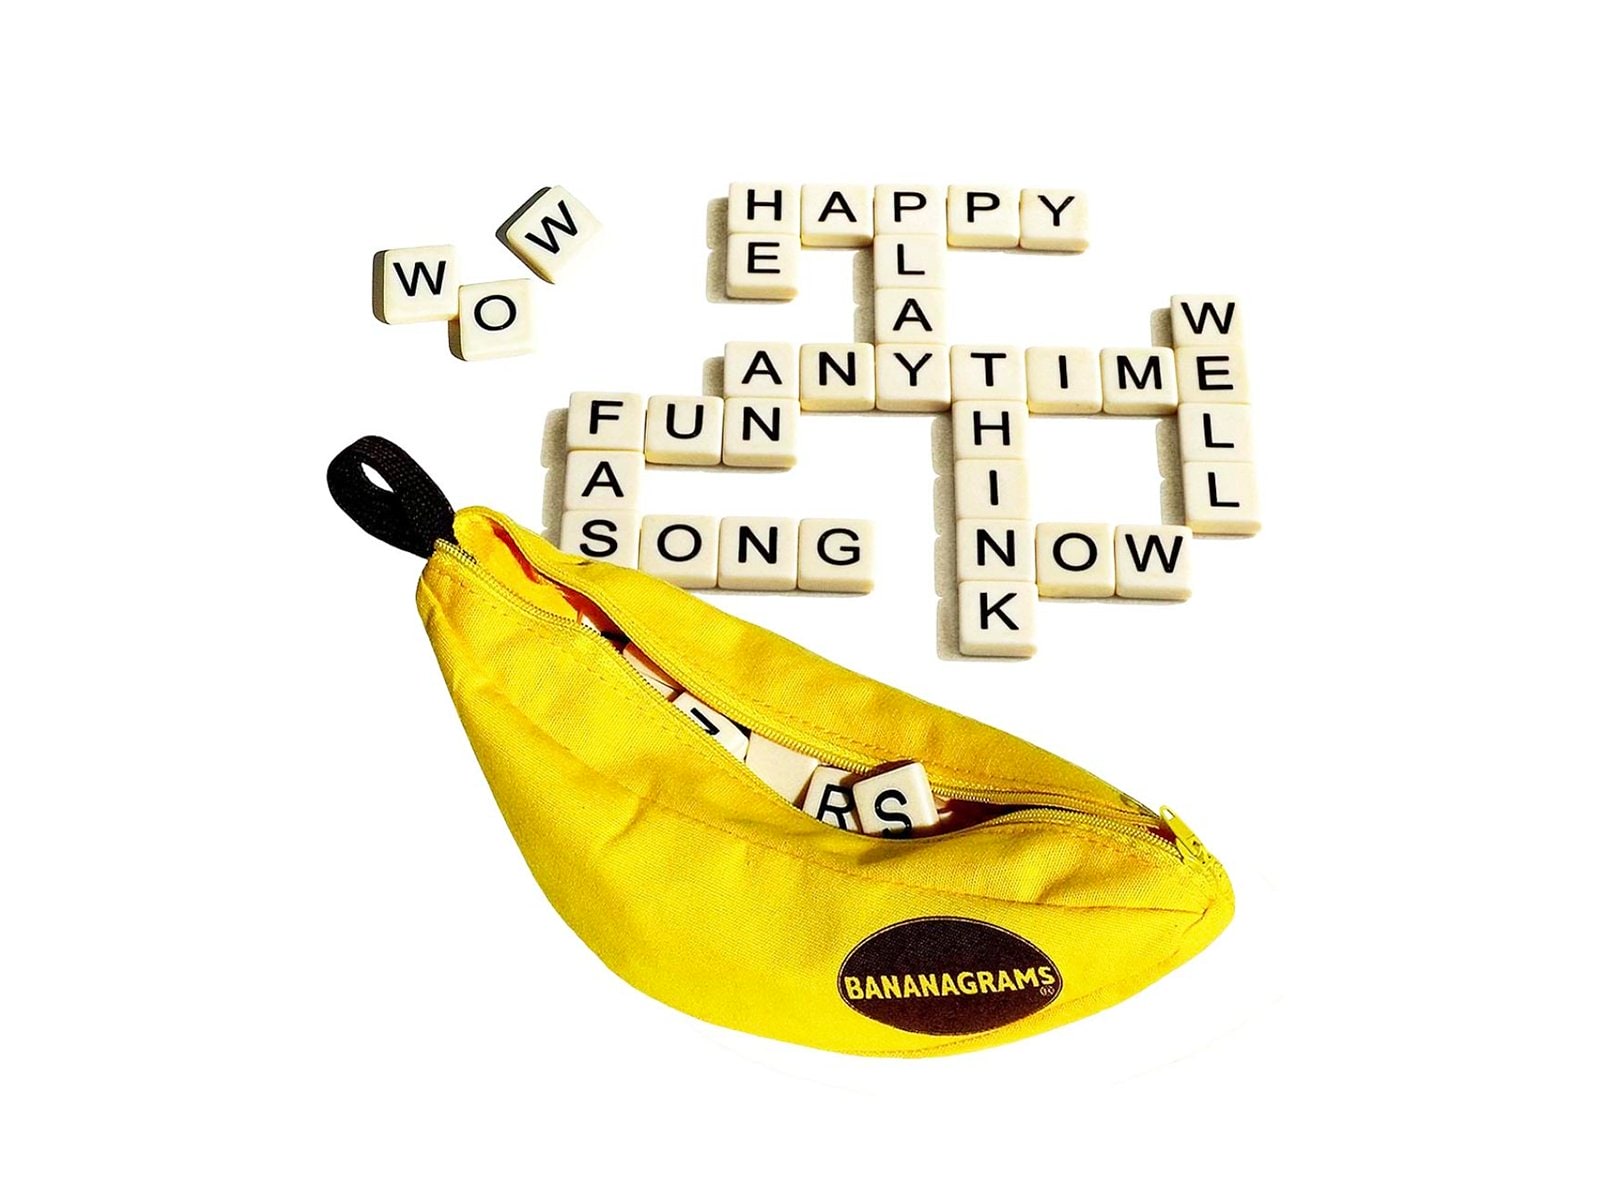 A Bananagrams banana and scrabble boards on a white background